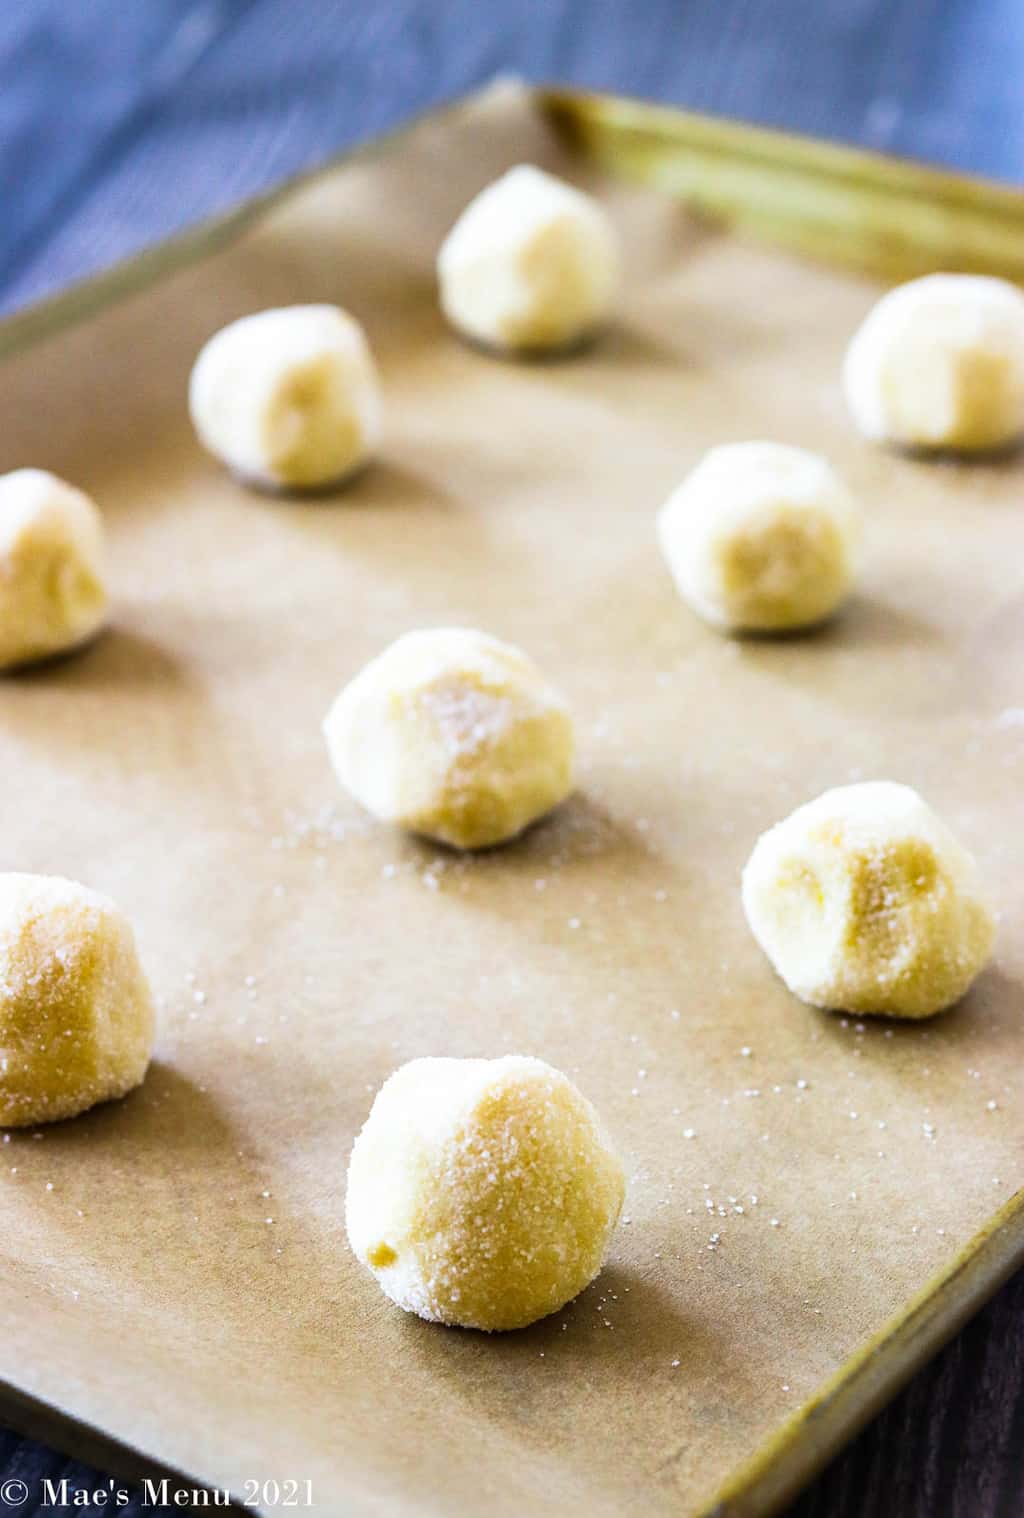 Balls of lemon sugar cookie rolled in granulated sugar on a baking tray with parchment paper